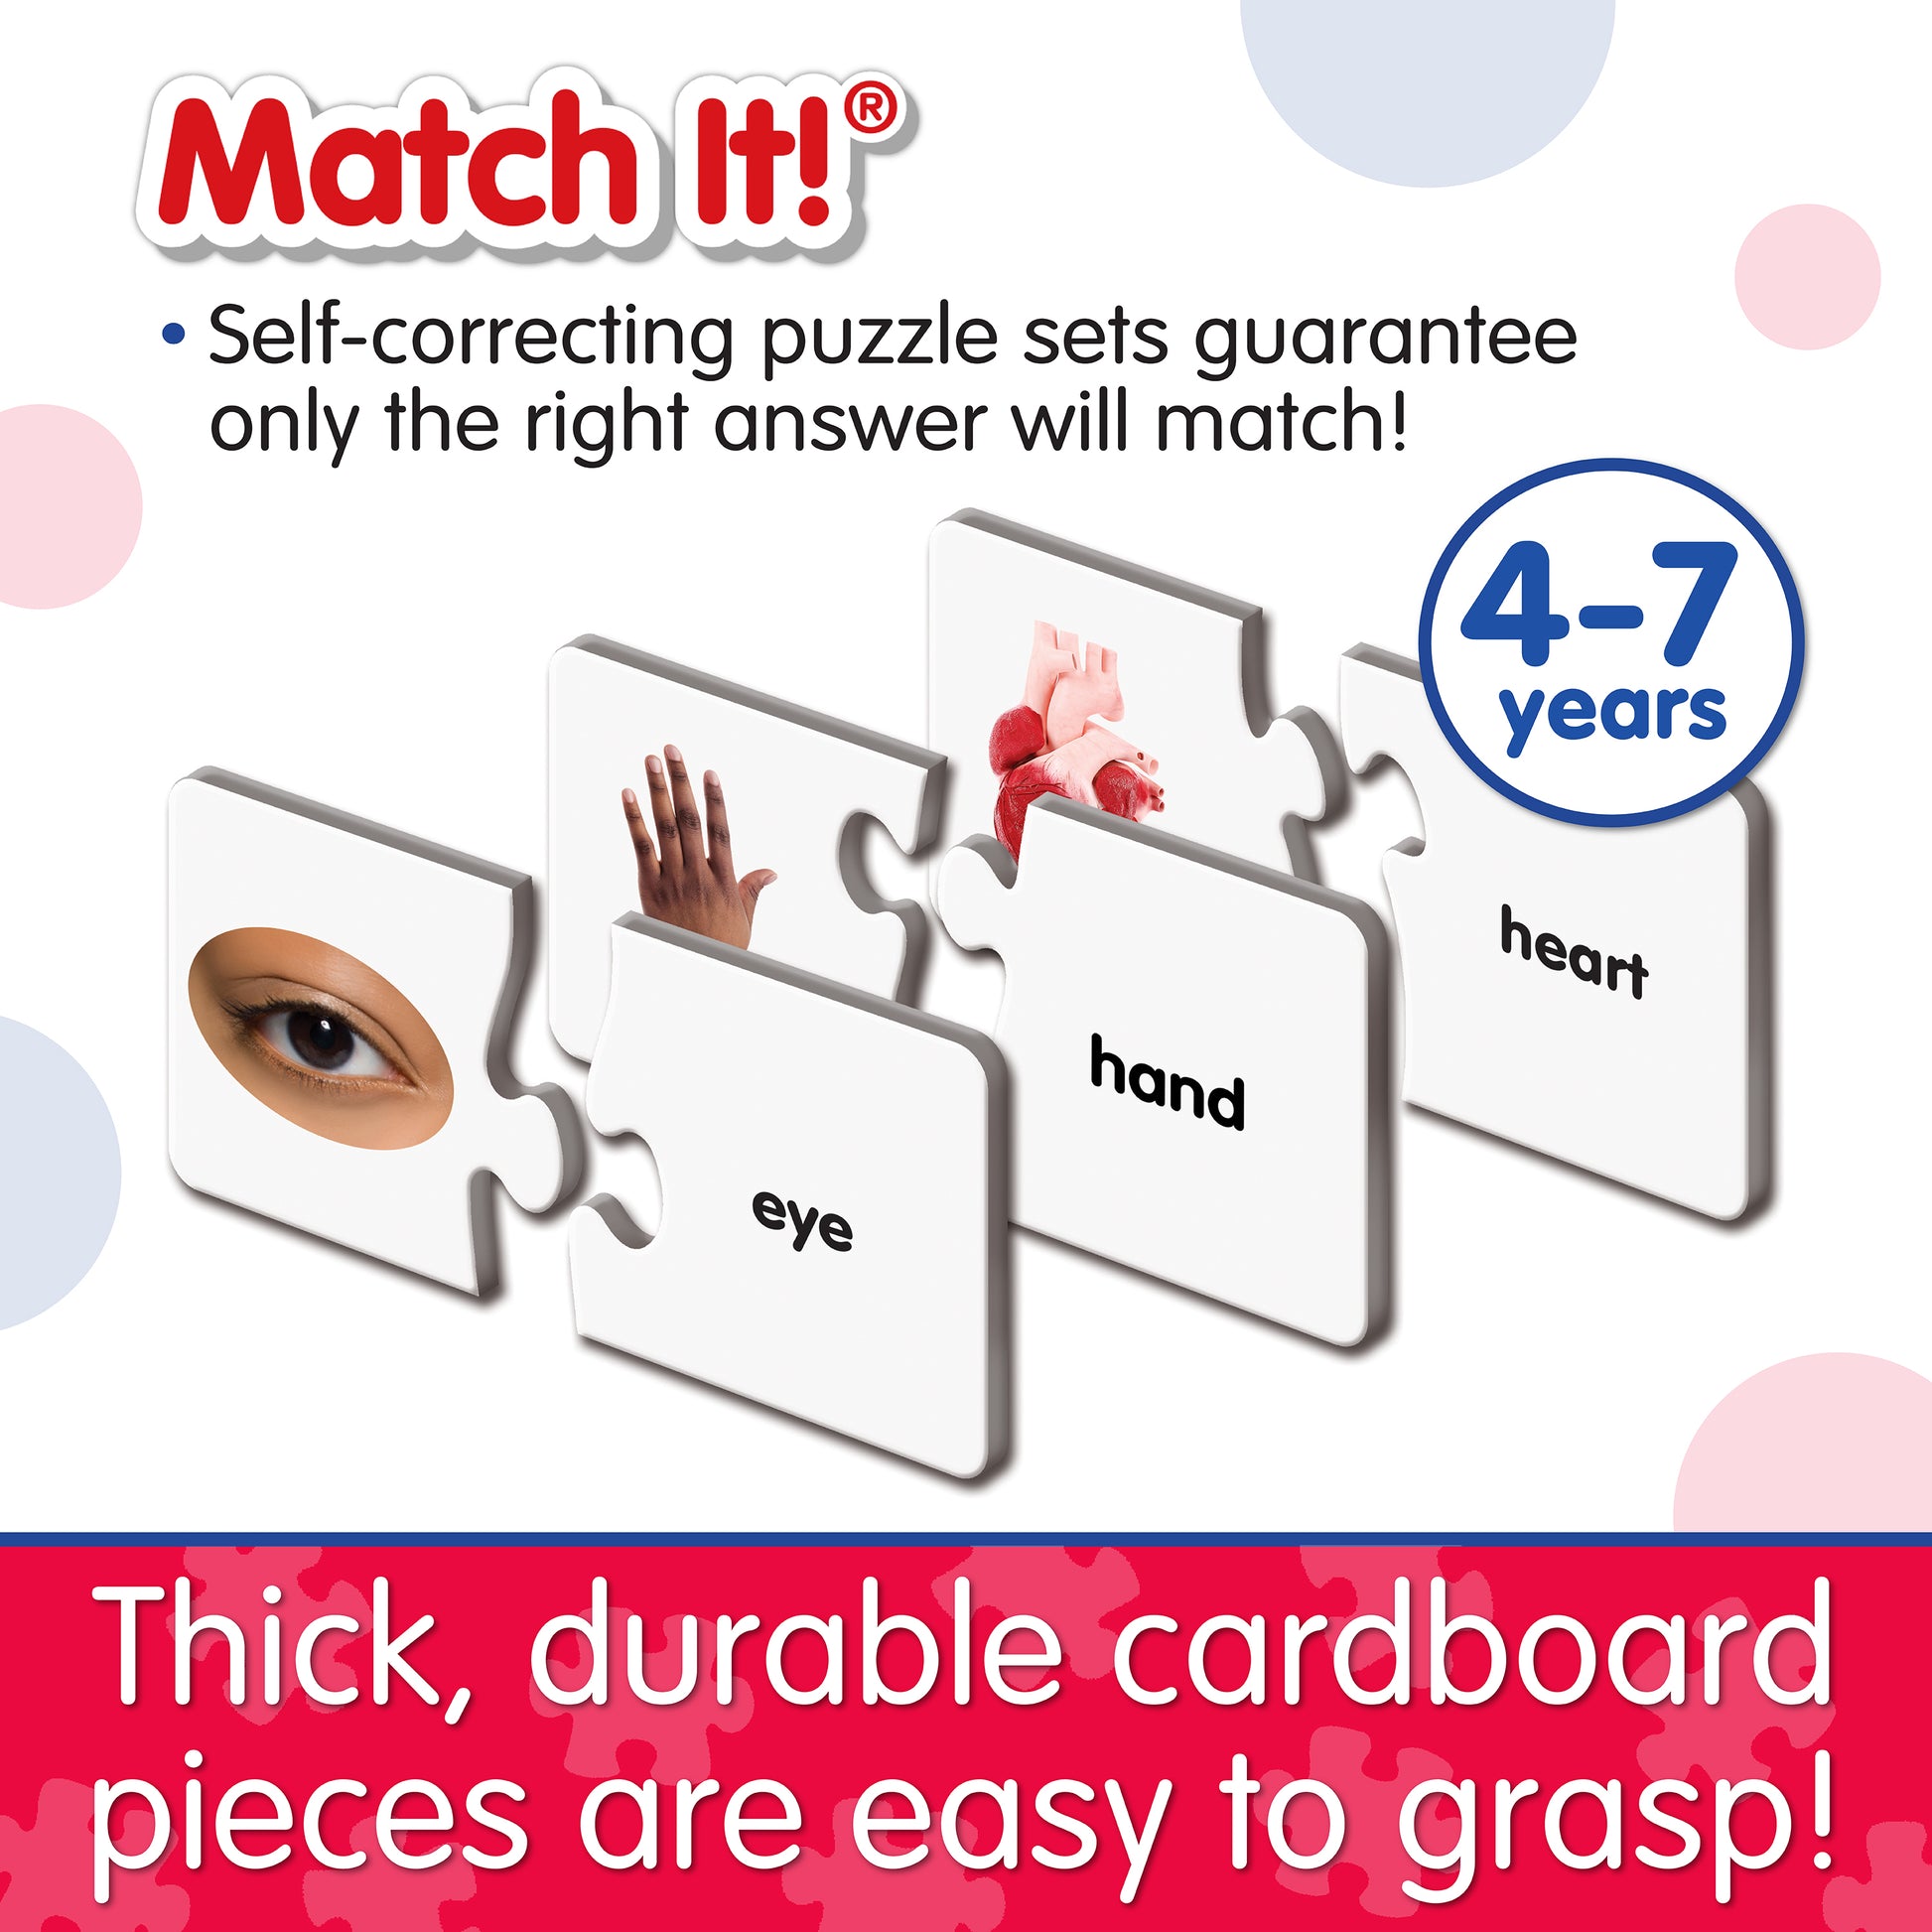 Infographic about Match It - All About Me's features that says, "Thick, durable cardboard pieces are easy to grasp!"